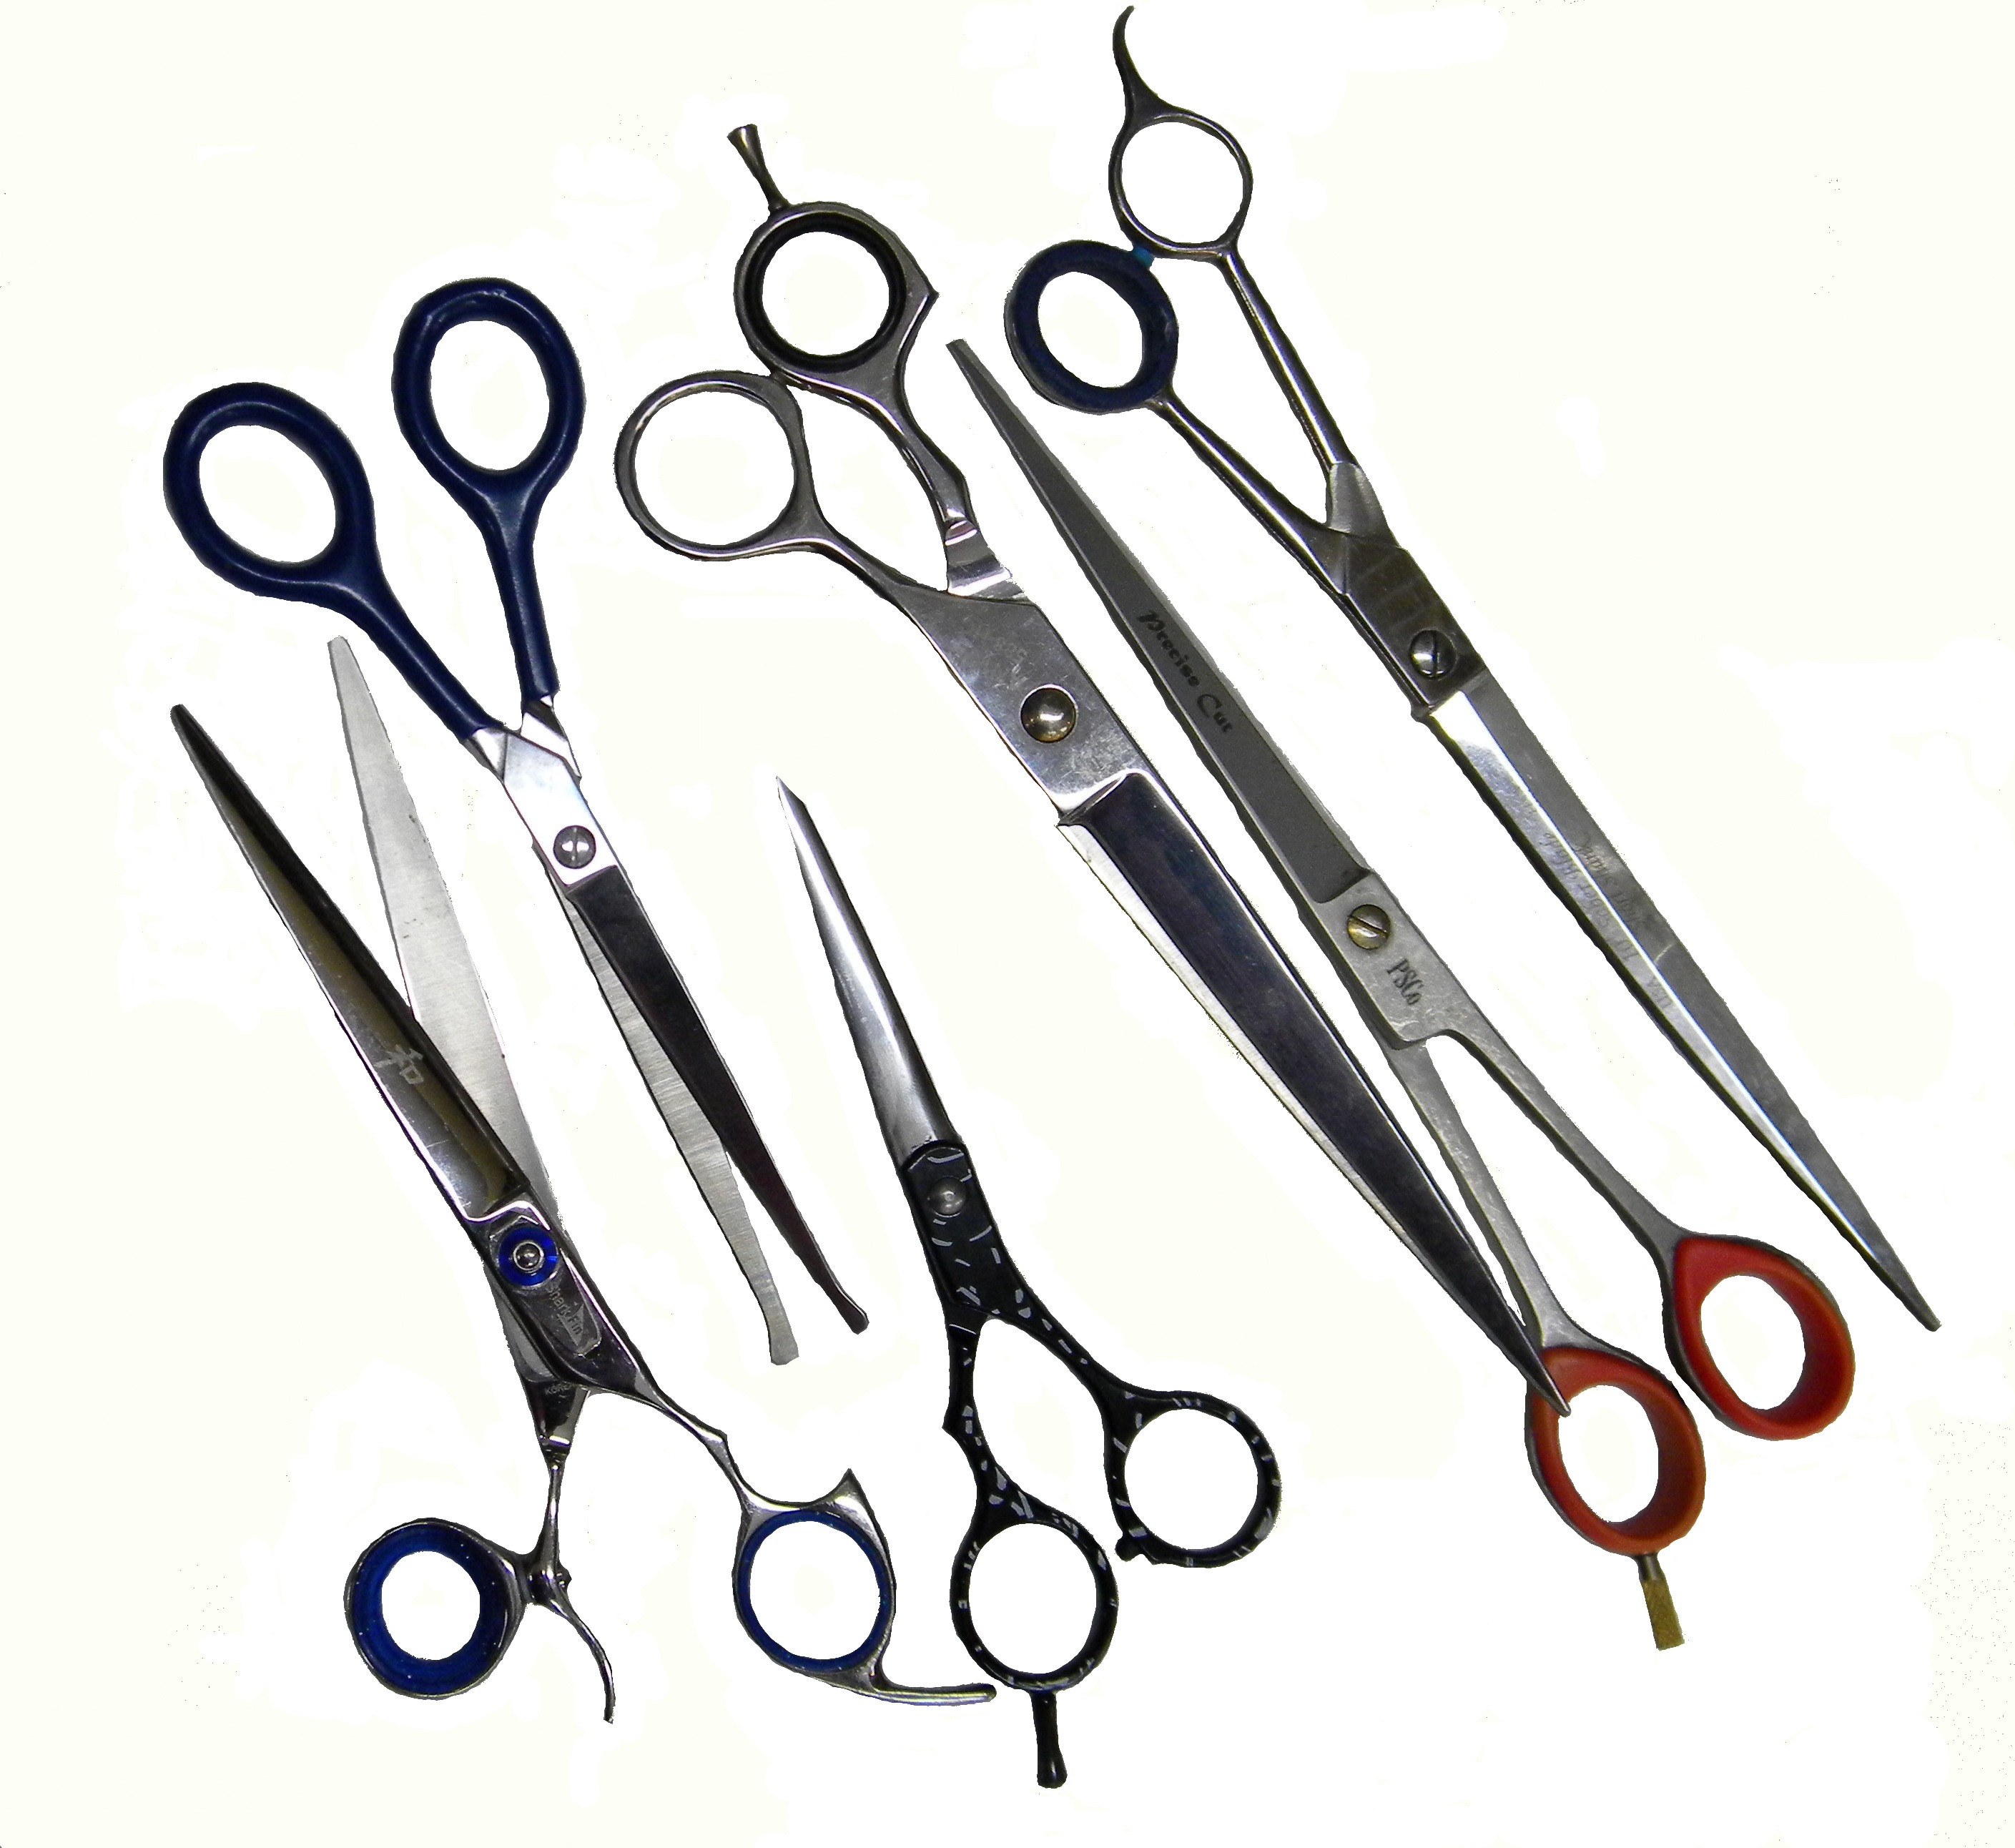 Picture of a typical grooming scissor